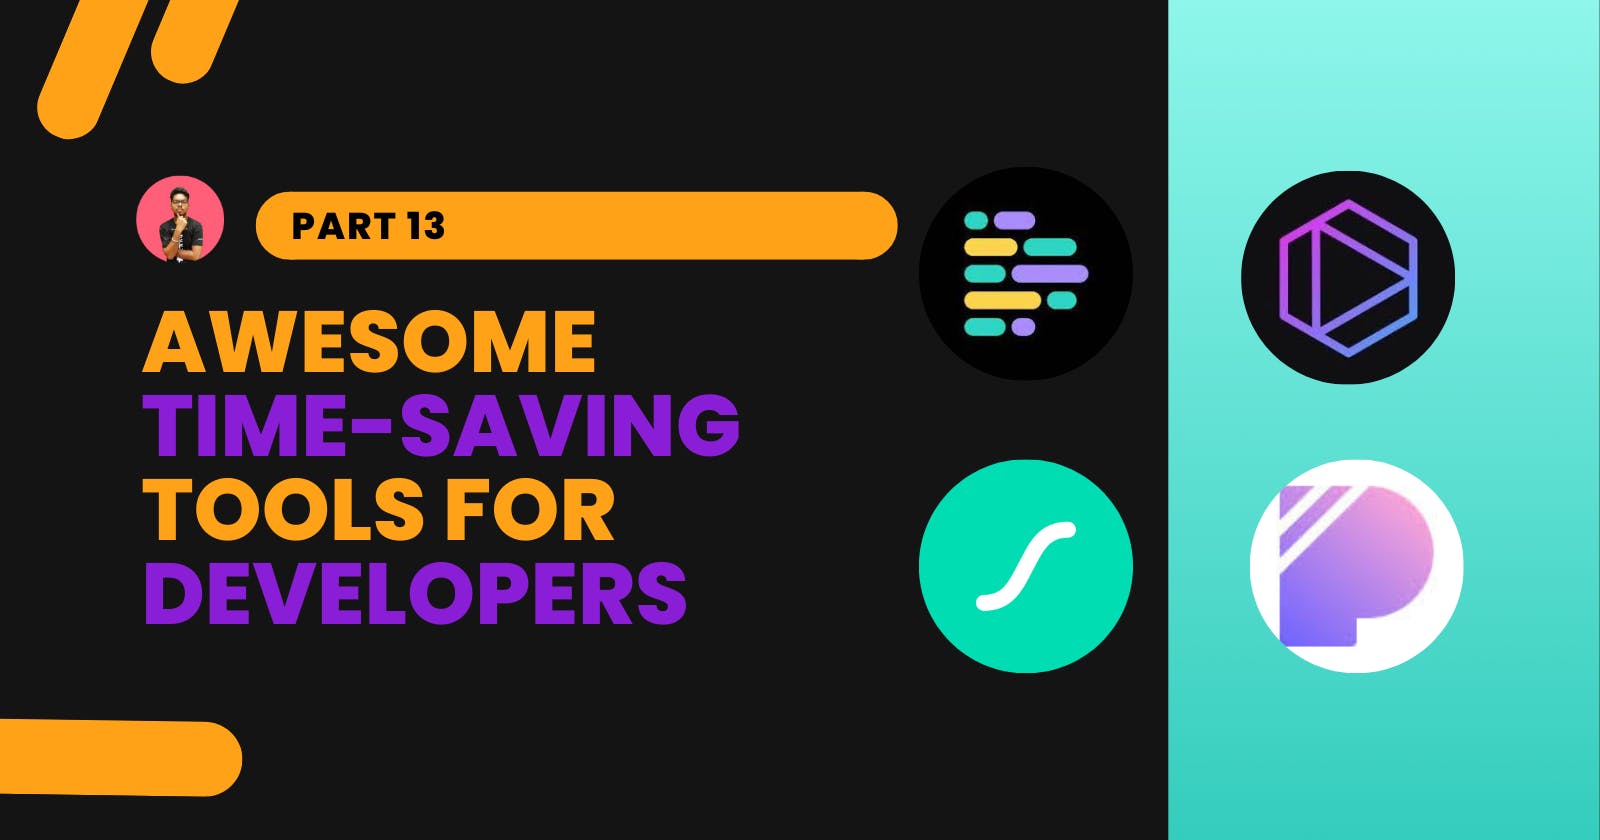 Awesome time-saving tools for developers